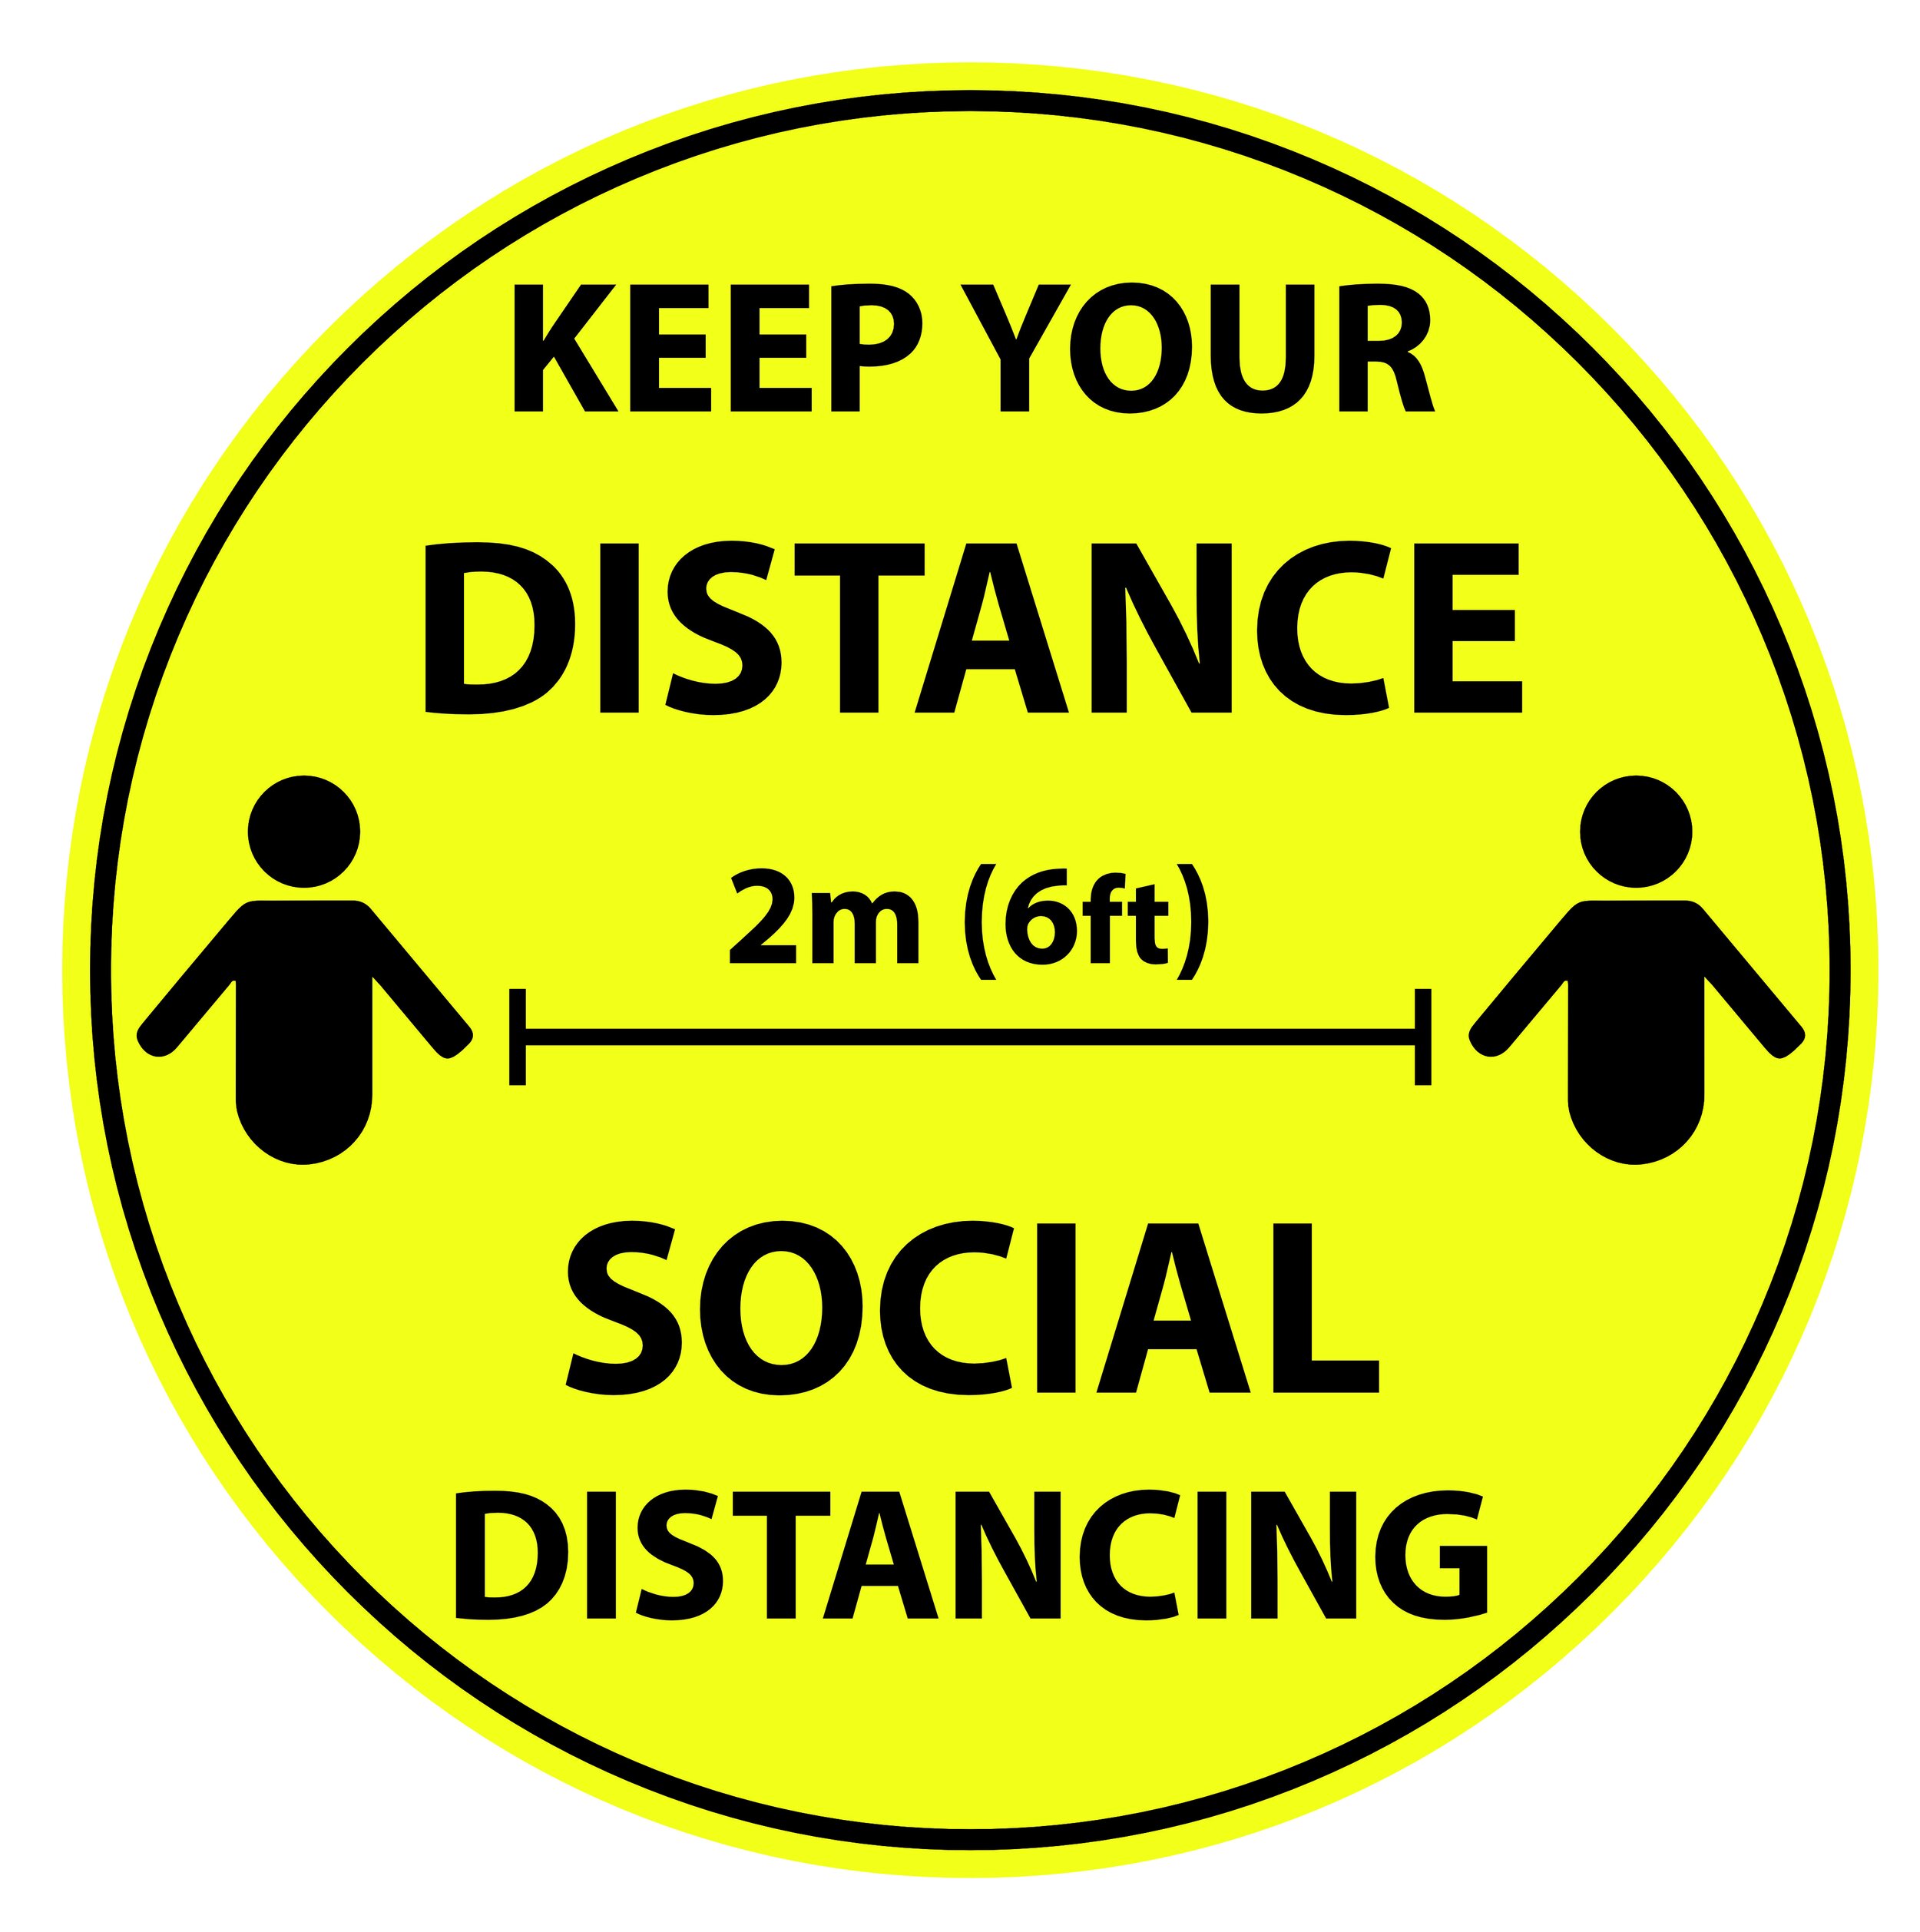 6ft Vinyl PVC Public Decal,Keep 6 Feet Distance Label Please Wait Here Stand Here 15 Pack 12 Social Distancing Floor Signs Yellow Floor Reminder Marker for Crowd Control Guidance 